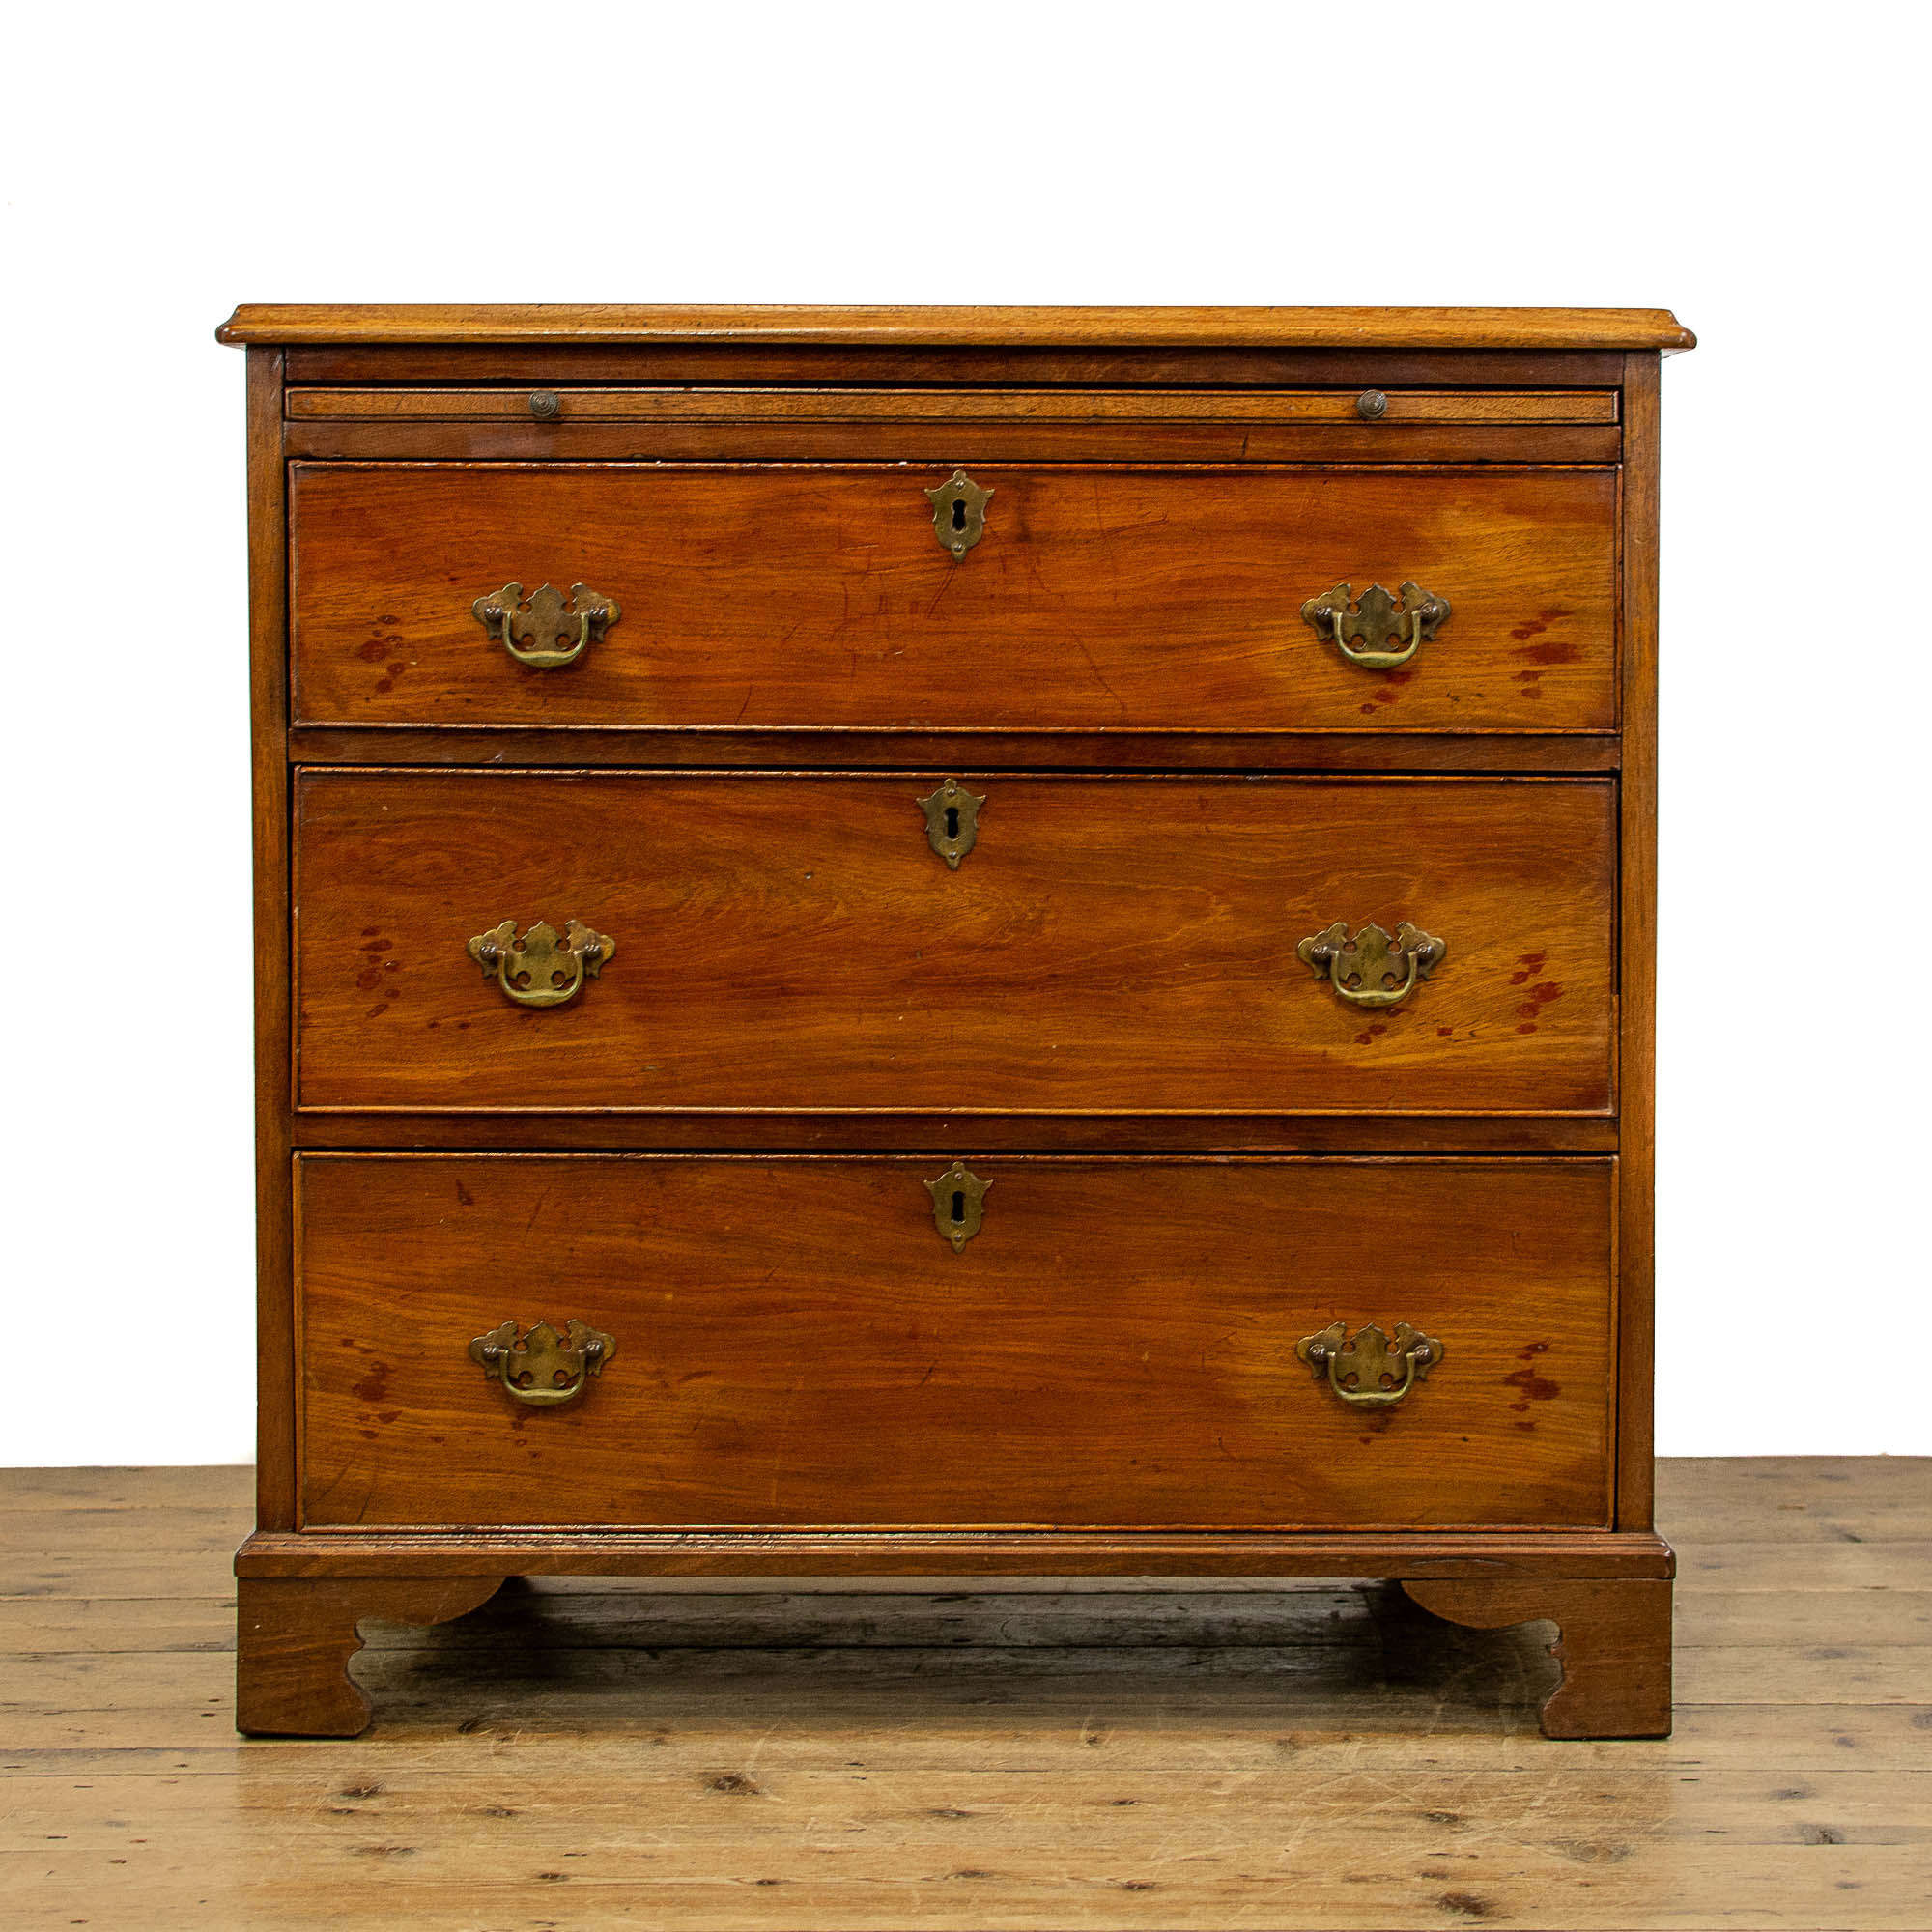 Small Antique Bachelor's Chest Of Drawers